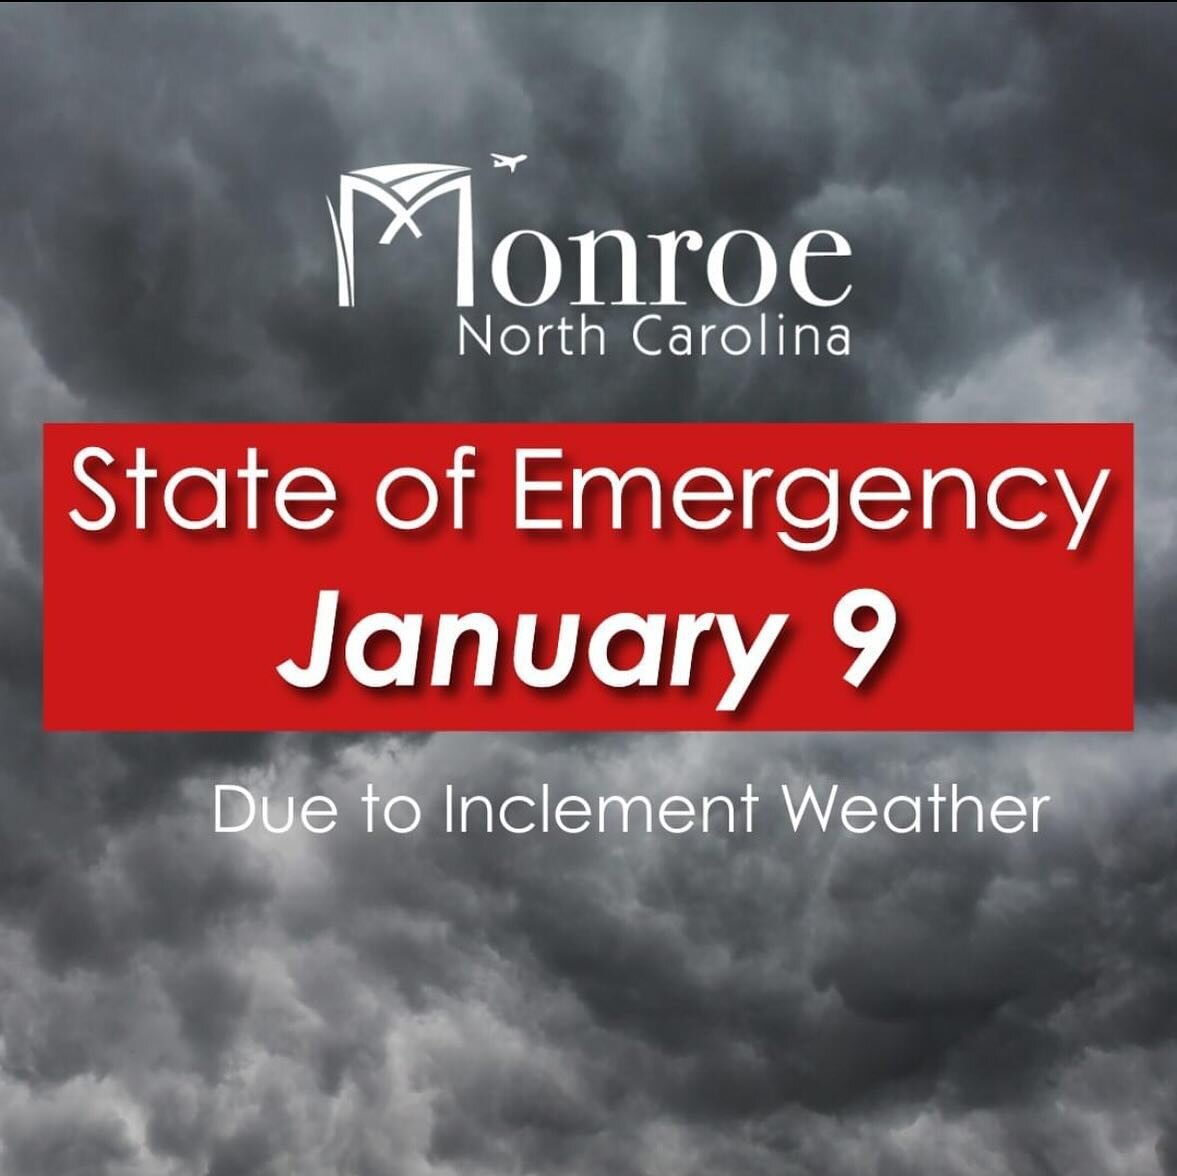 *State of Emergency Proclamation*